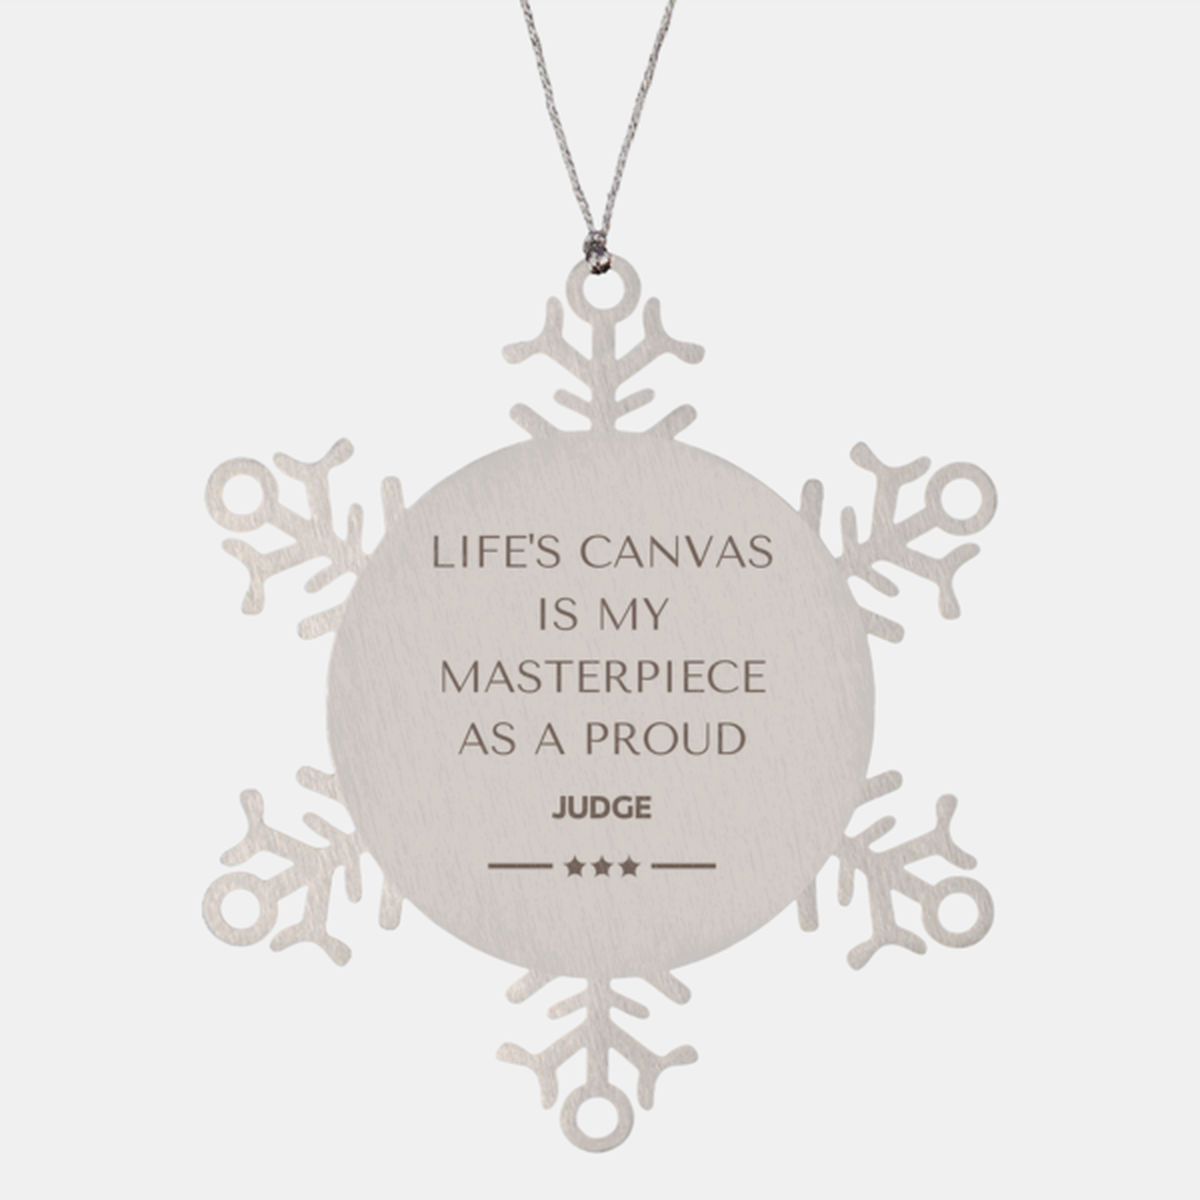 Proud Judge Gifts, Life's canvas is my masterpiece, Epic Birthday Christmas Unique Snowflake Ornament For Judge, Coworkers, Men, Women, Friends